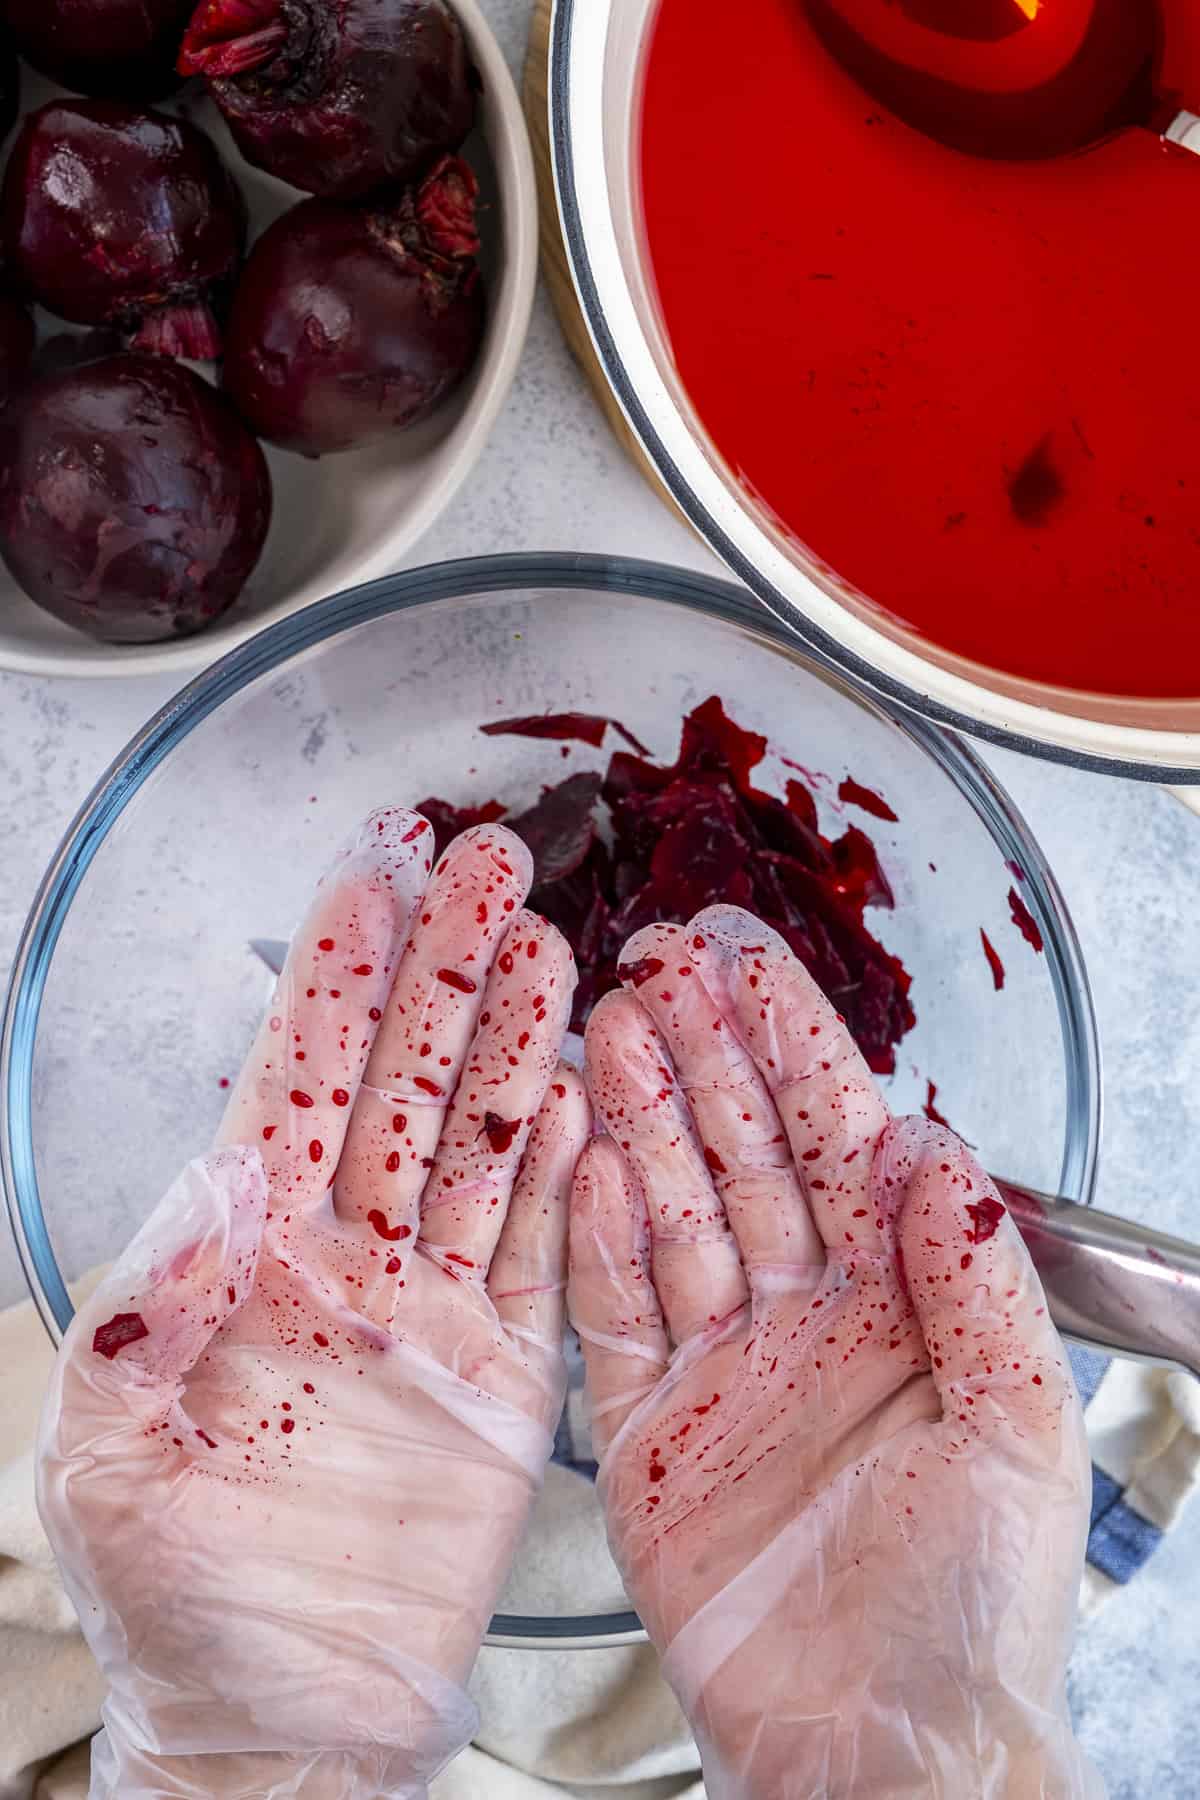 Hands with gloves showing the stains of beets.